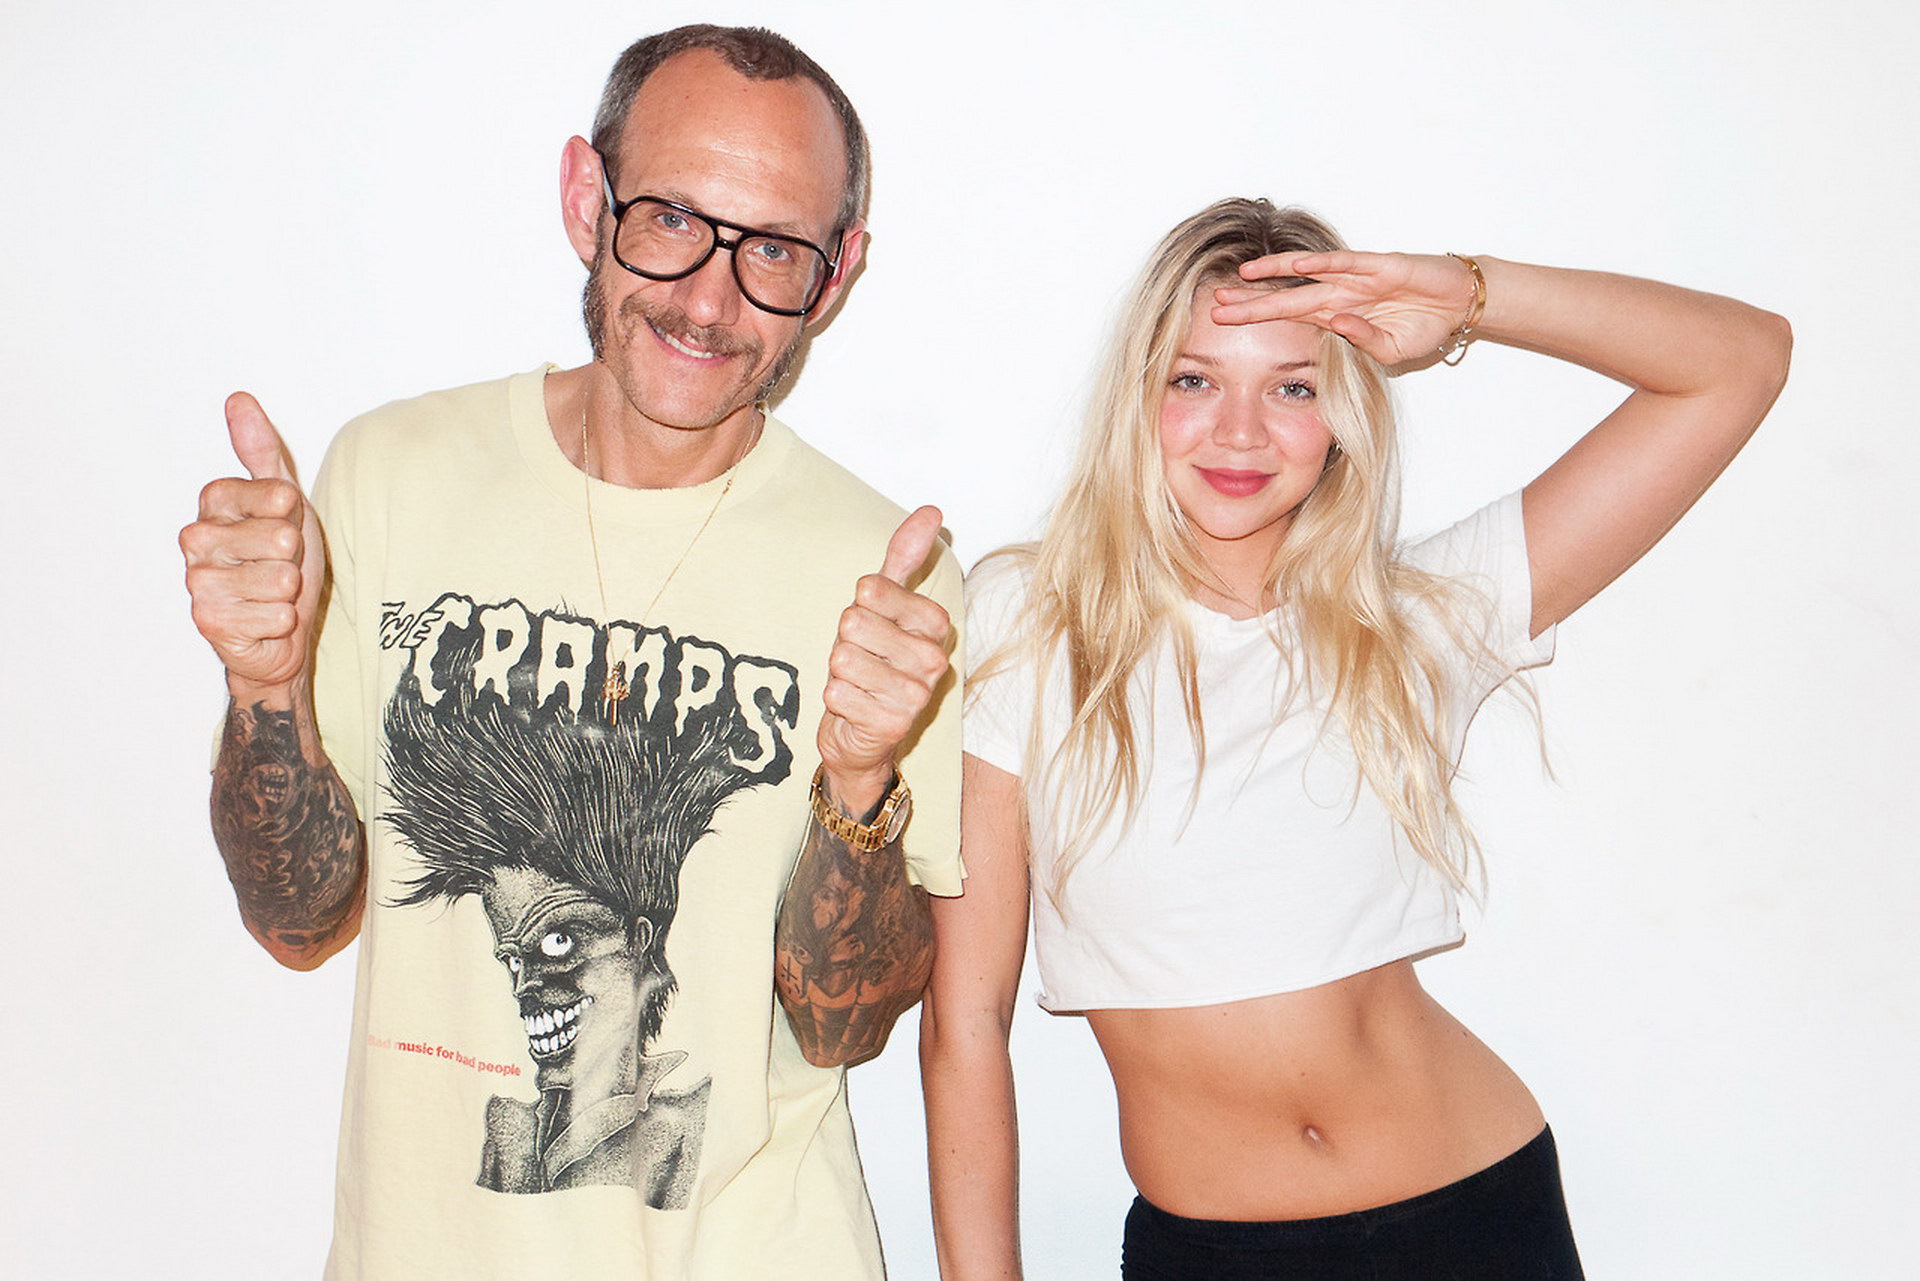 Jessie_Andrews_see_through_lingerie_by_Terry_Richardson_2014_July_9x_HQ_13.jpg